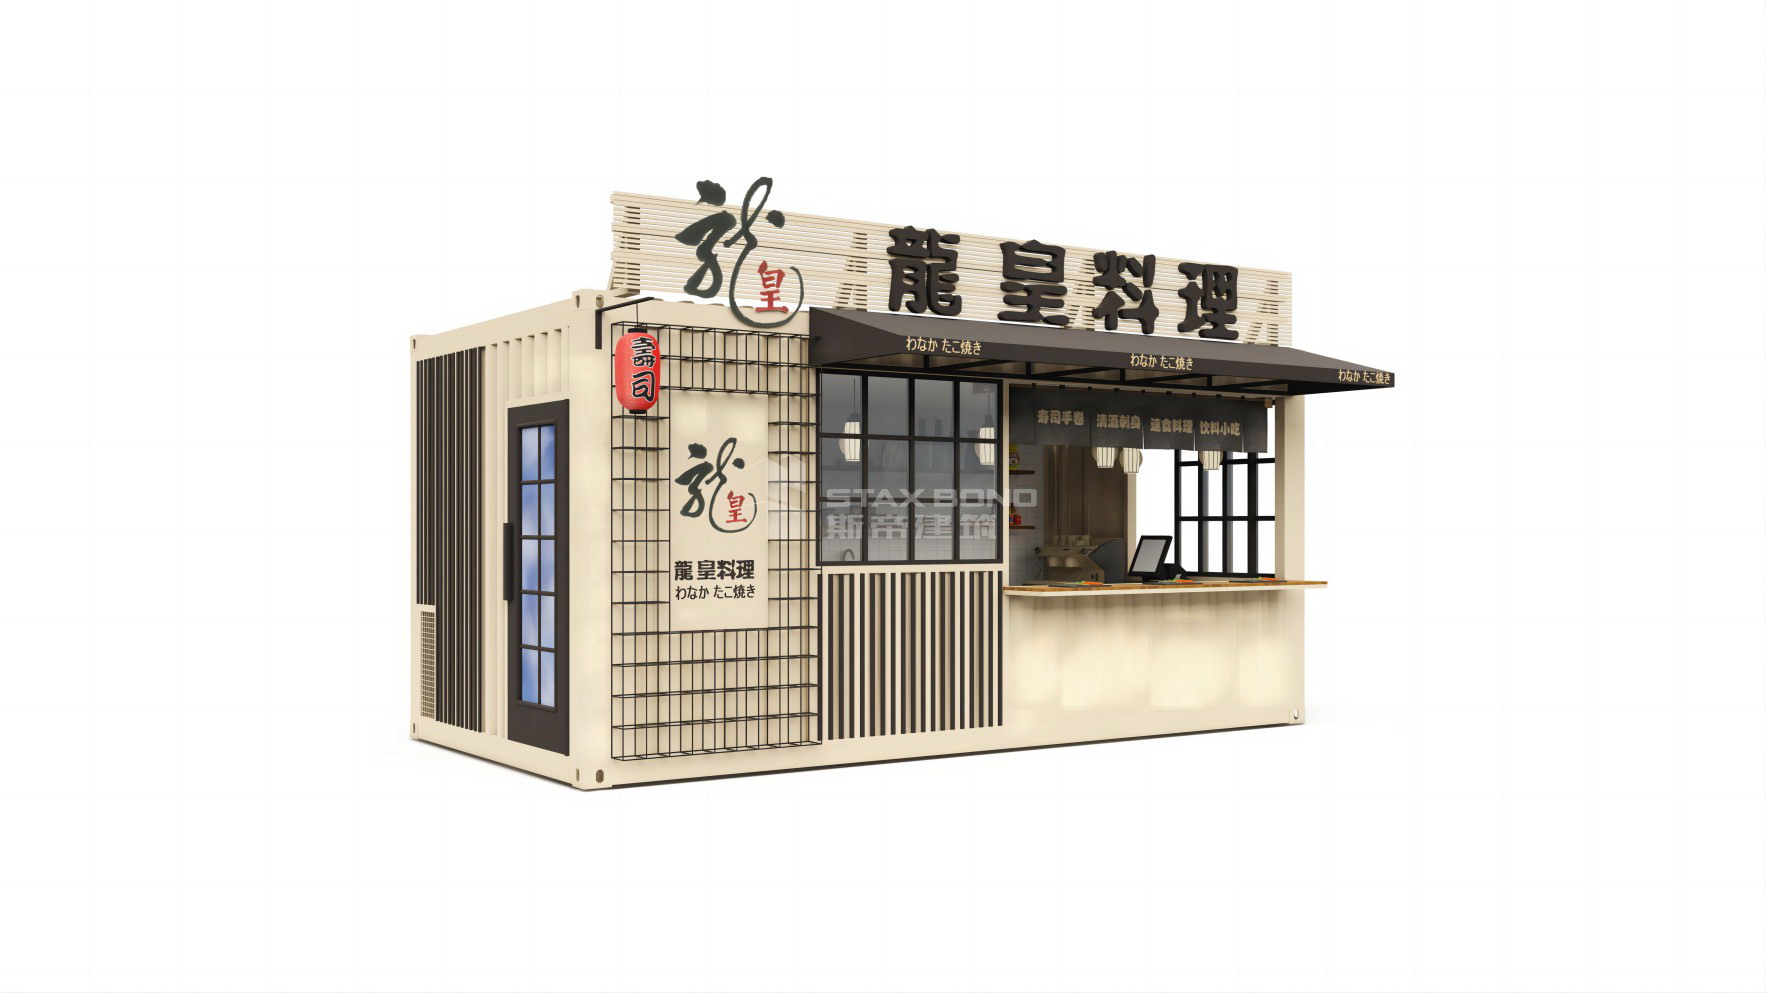 Modular Container Building, Japanese store